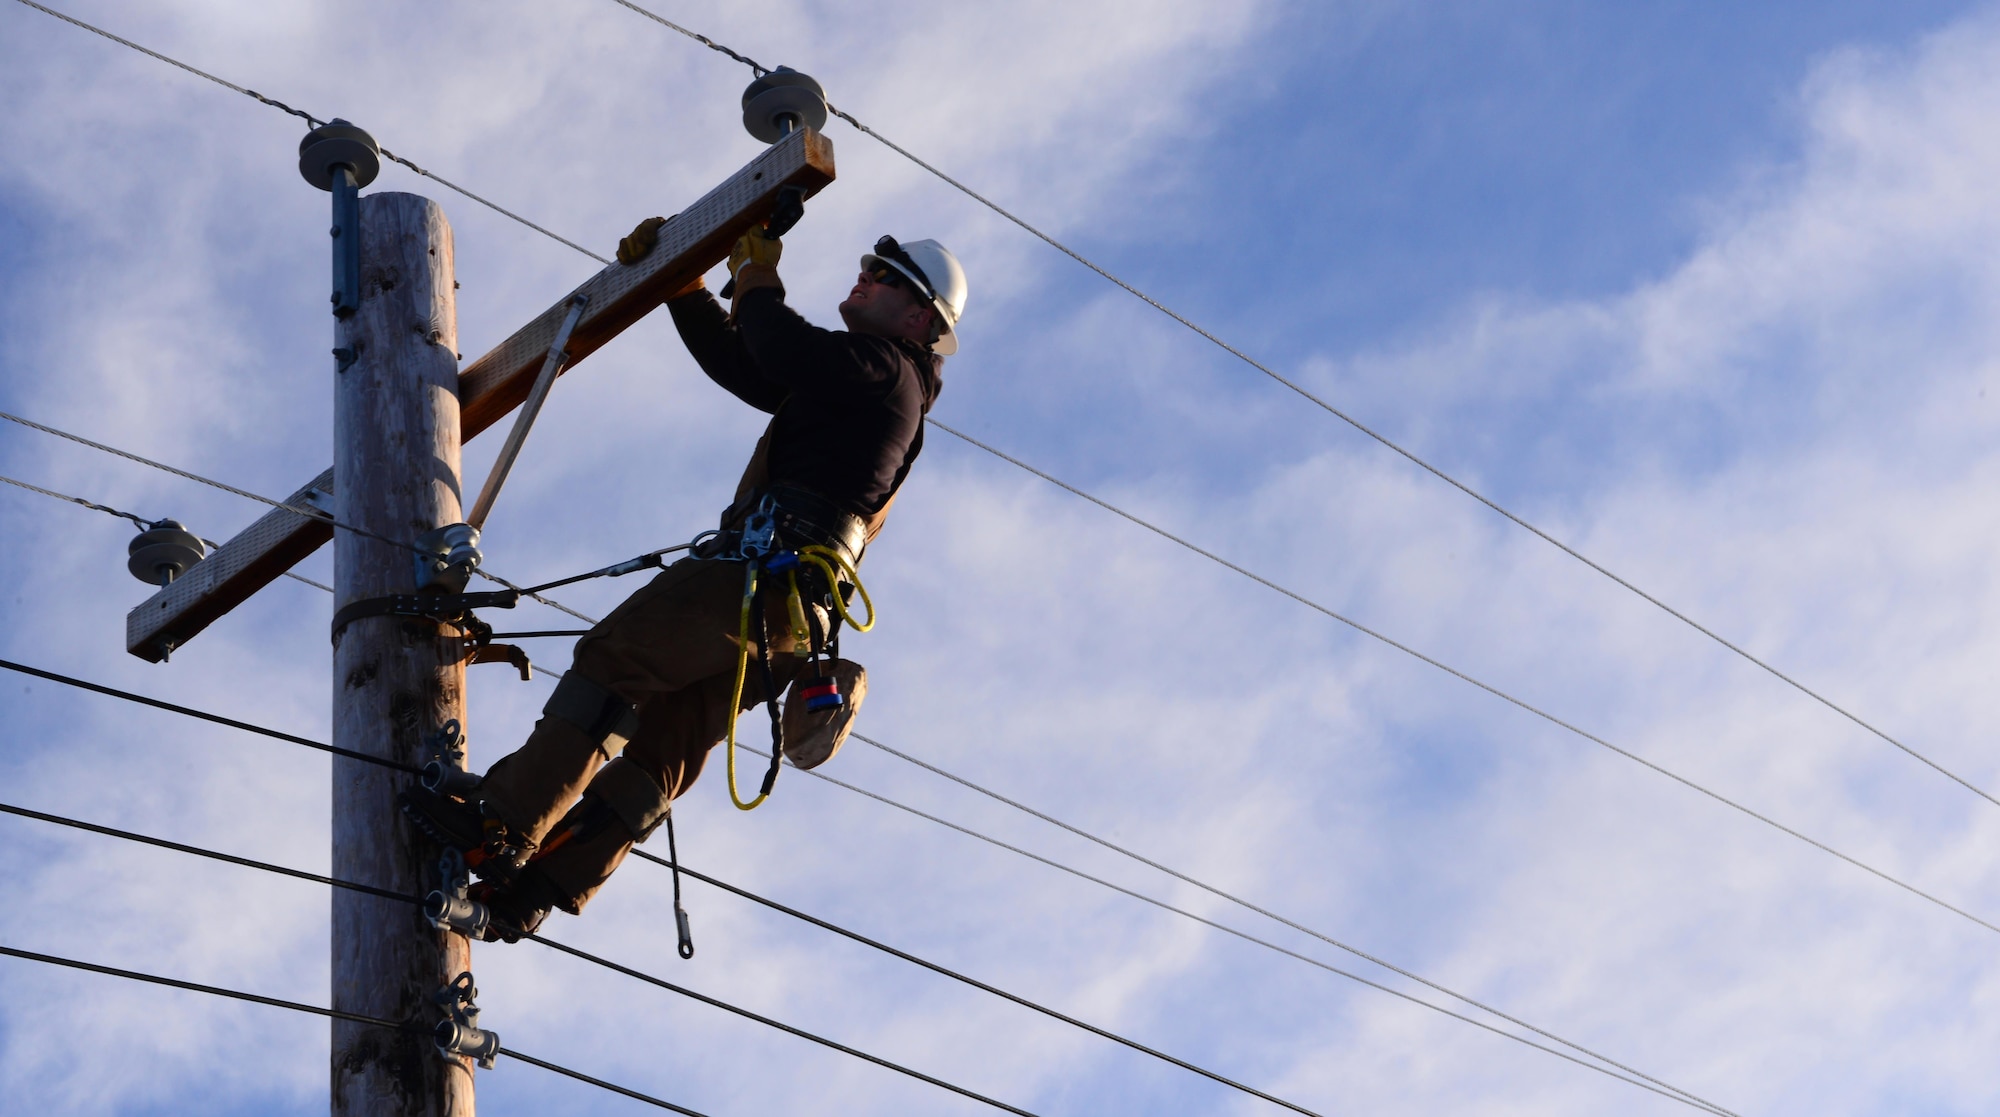 U.S. Air Force Senior Airman Travis Bothast, a 354th Civil Engineer Squadron electrical systems journeyman, works on a utility pole Feb. 5, 2016, at Eielson Air Force Base, Alaska. Bothast works on the exterior side of electrical systems, maintaining streetlights, utility poles and the Yukon Training Range. (U.S. Air Force photo by Airman 1st Class Cassandra Whitman/Released)